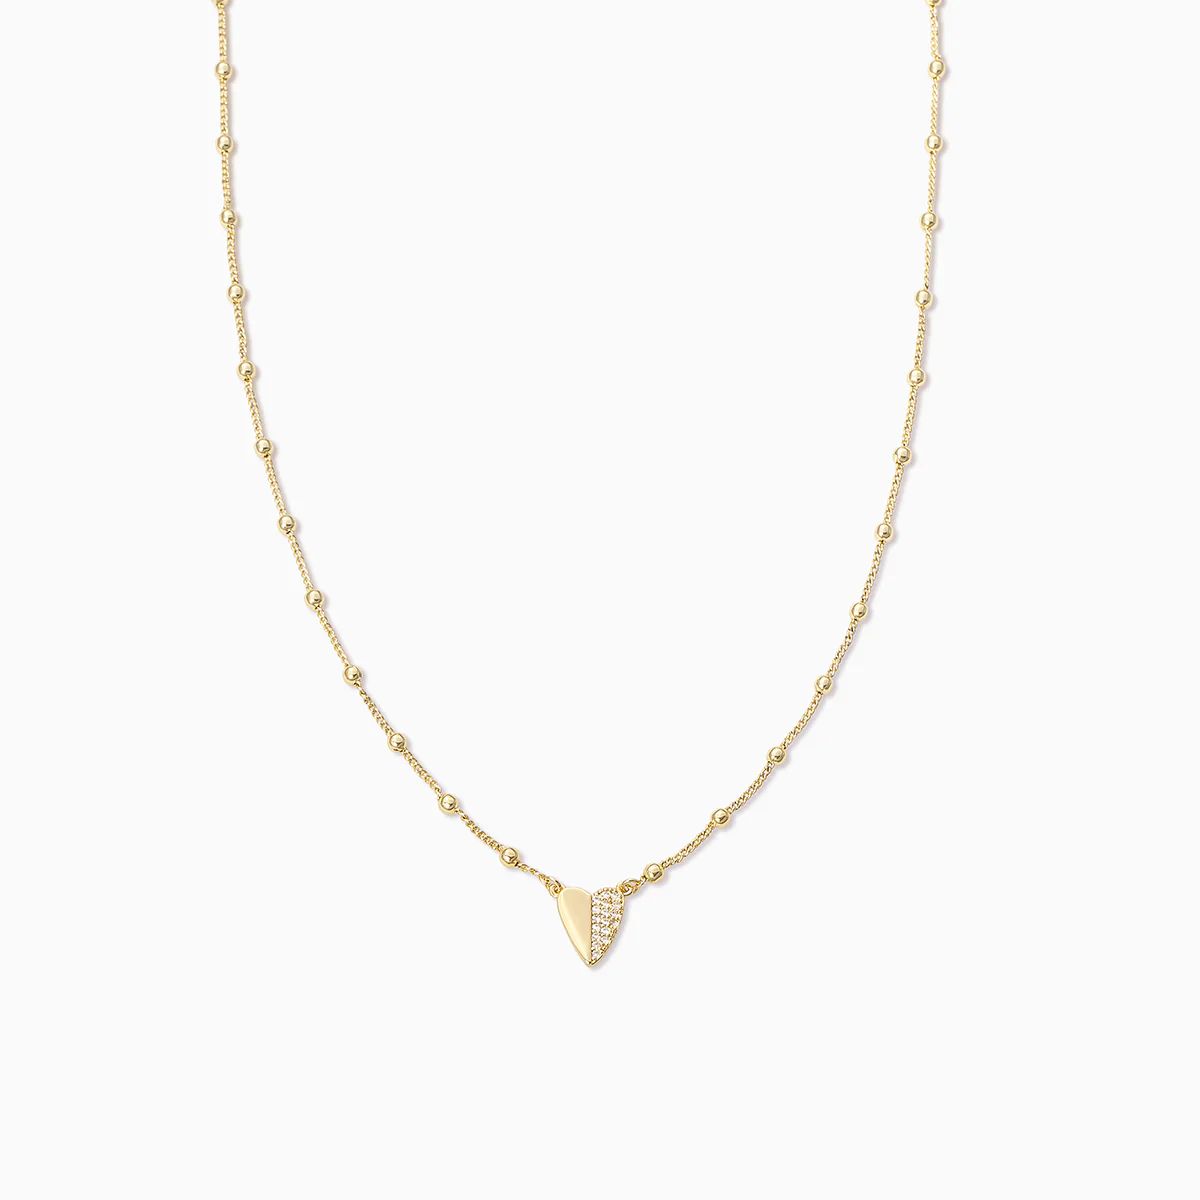 Other Half Heart Necklace | Uncommon James